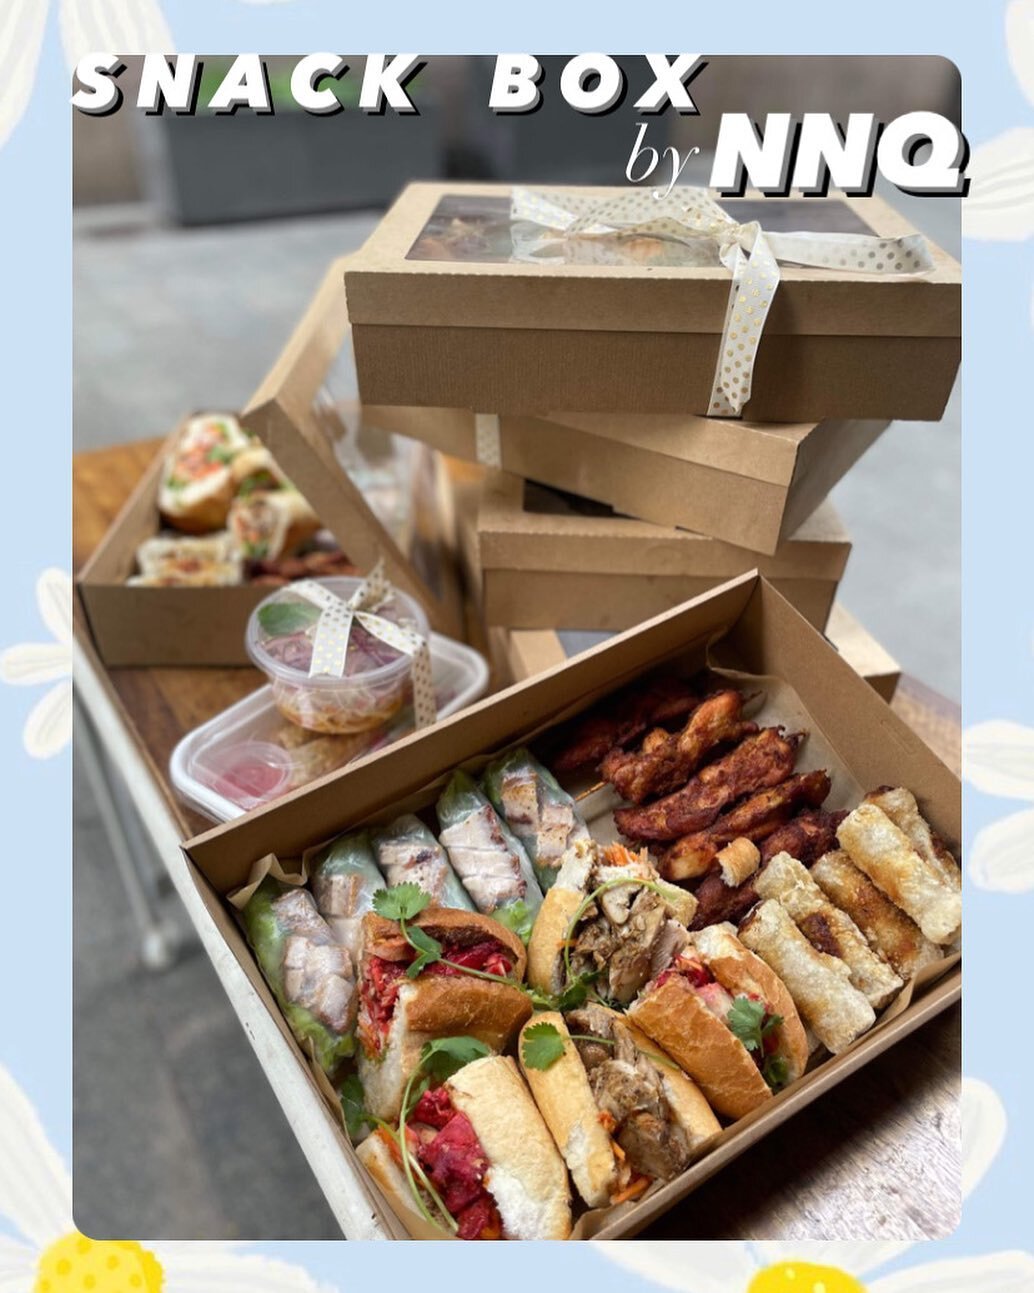 Spring is finally here 🌸🌸🌸

Our snack box is perfect choice for corporate lunch, picnic or casual family gathering. Starting from $12 per person.
24 hours notice required.

Contact us via bookings@nnqwoodville.com.au for ordering or inquiry.